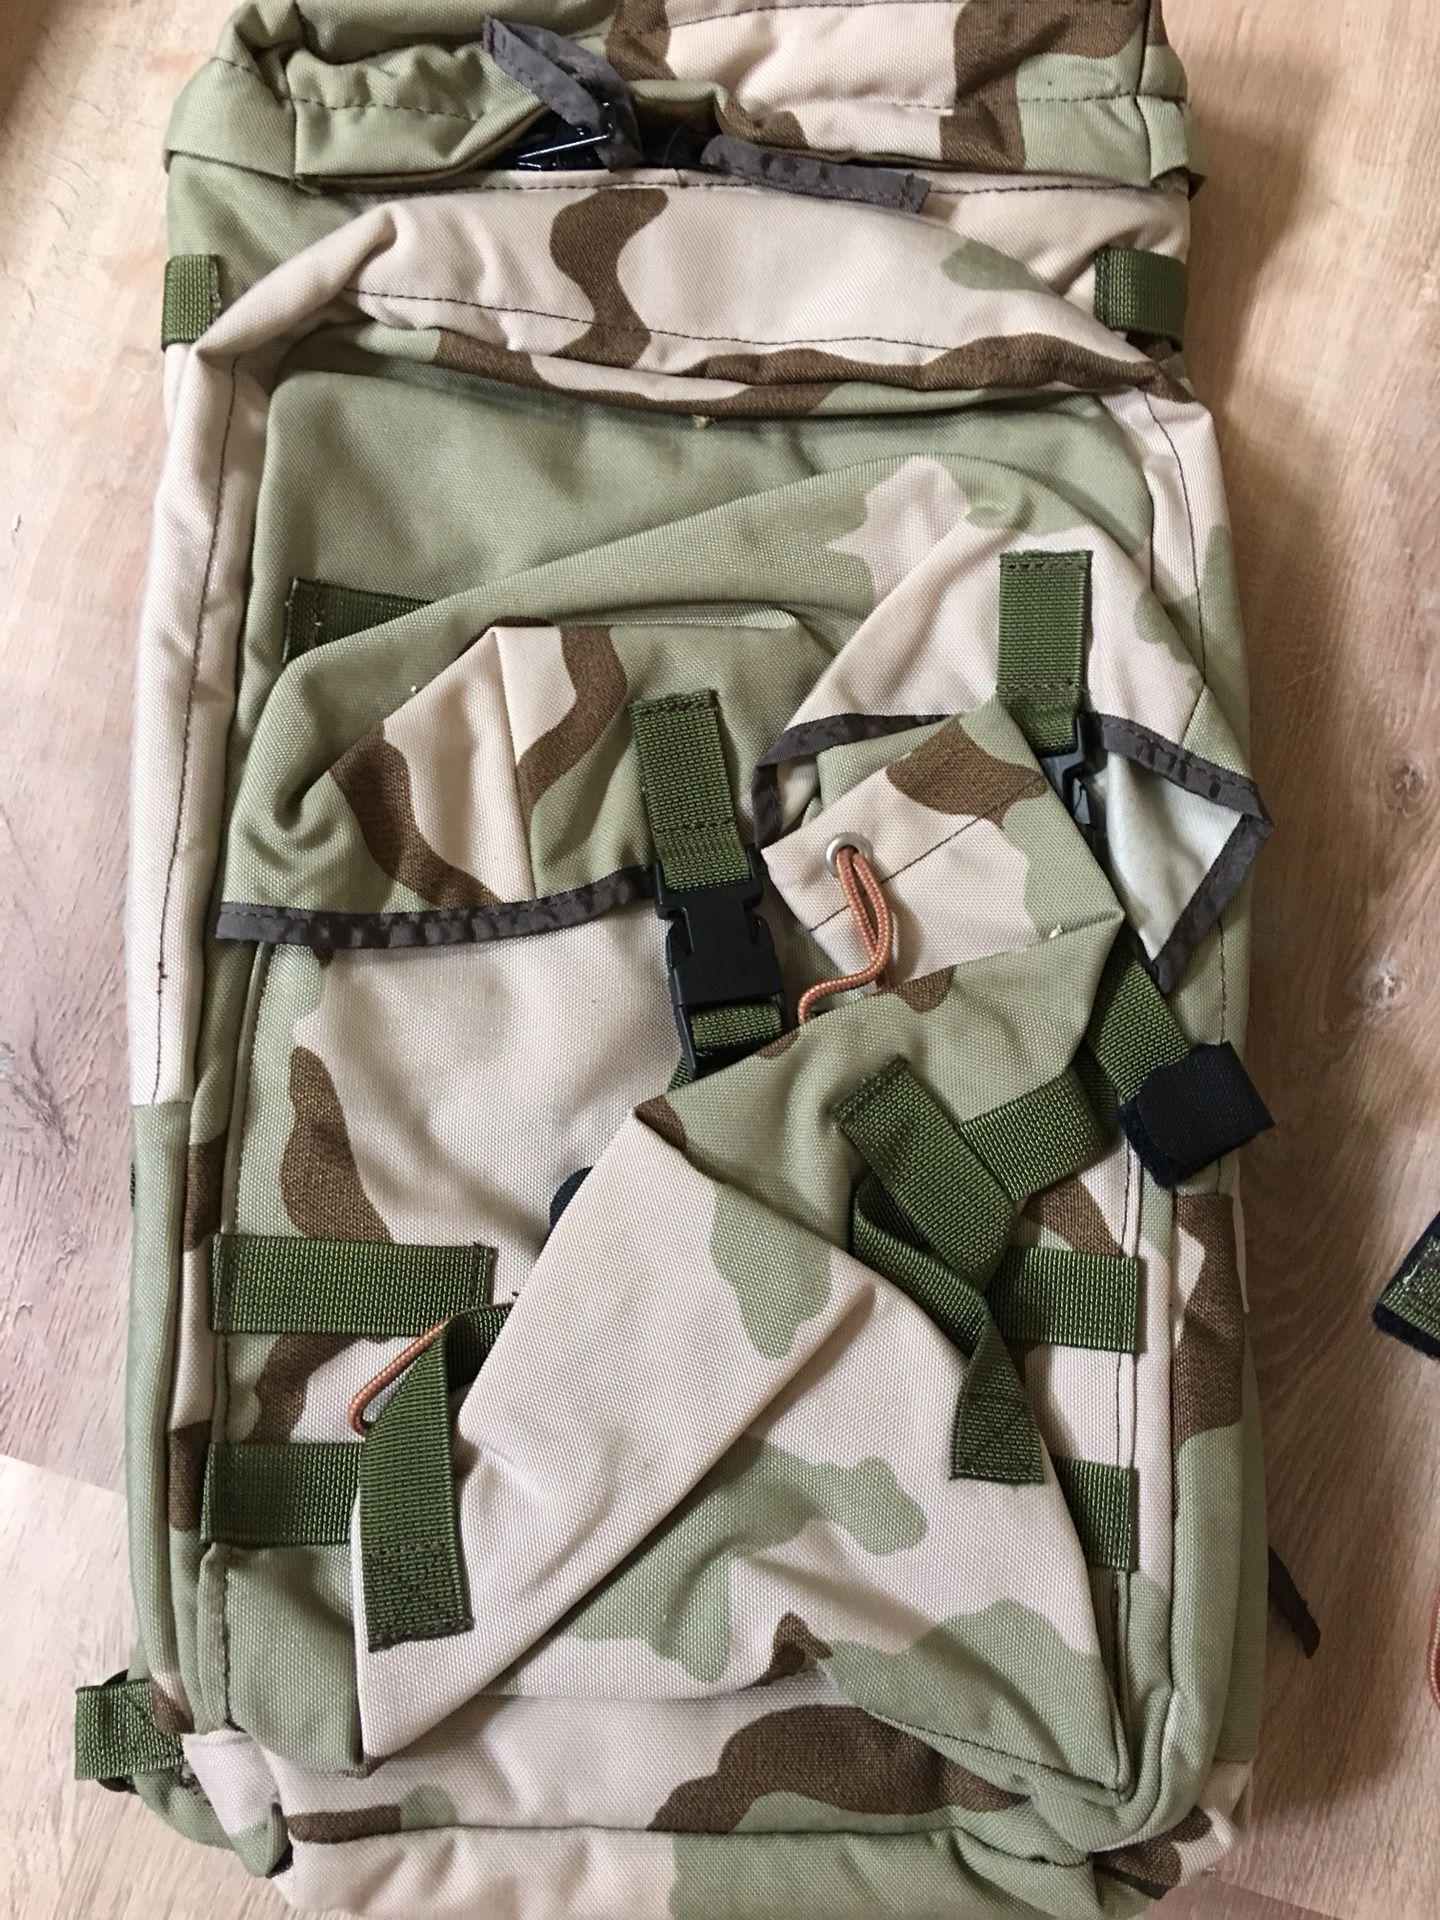 Backpacks, insulated-all brand new, never used.